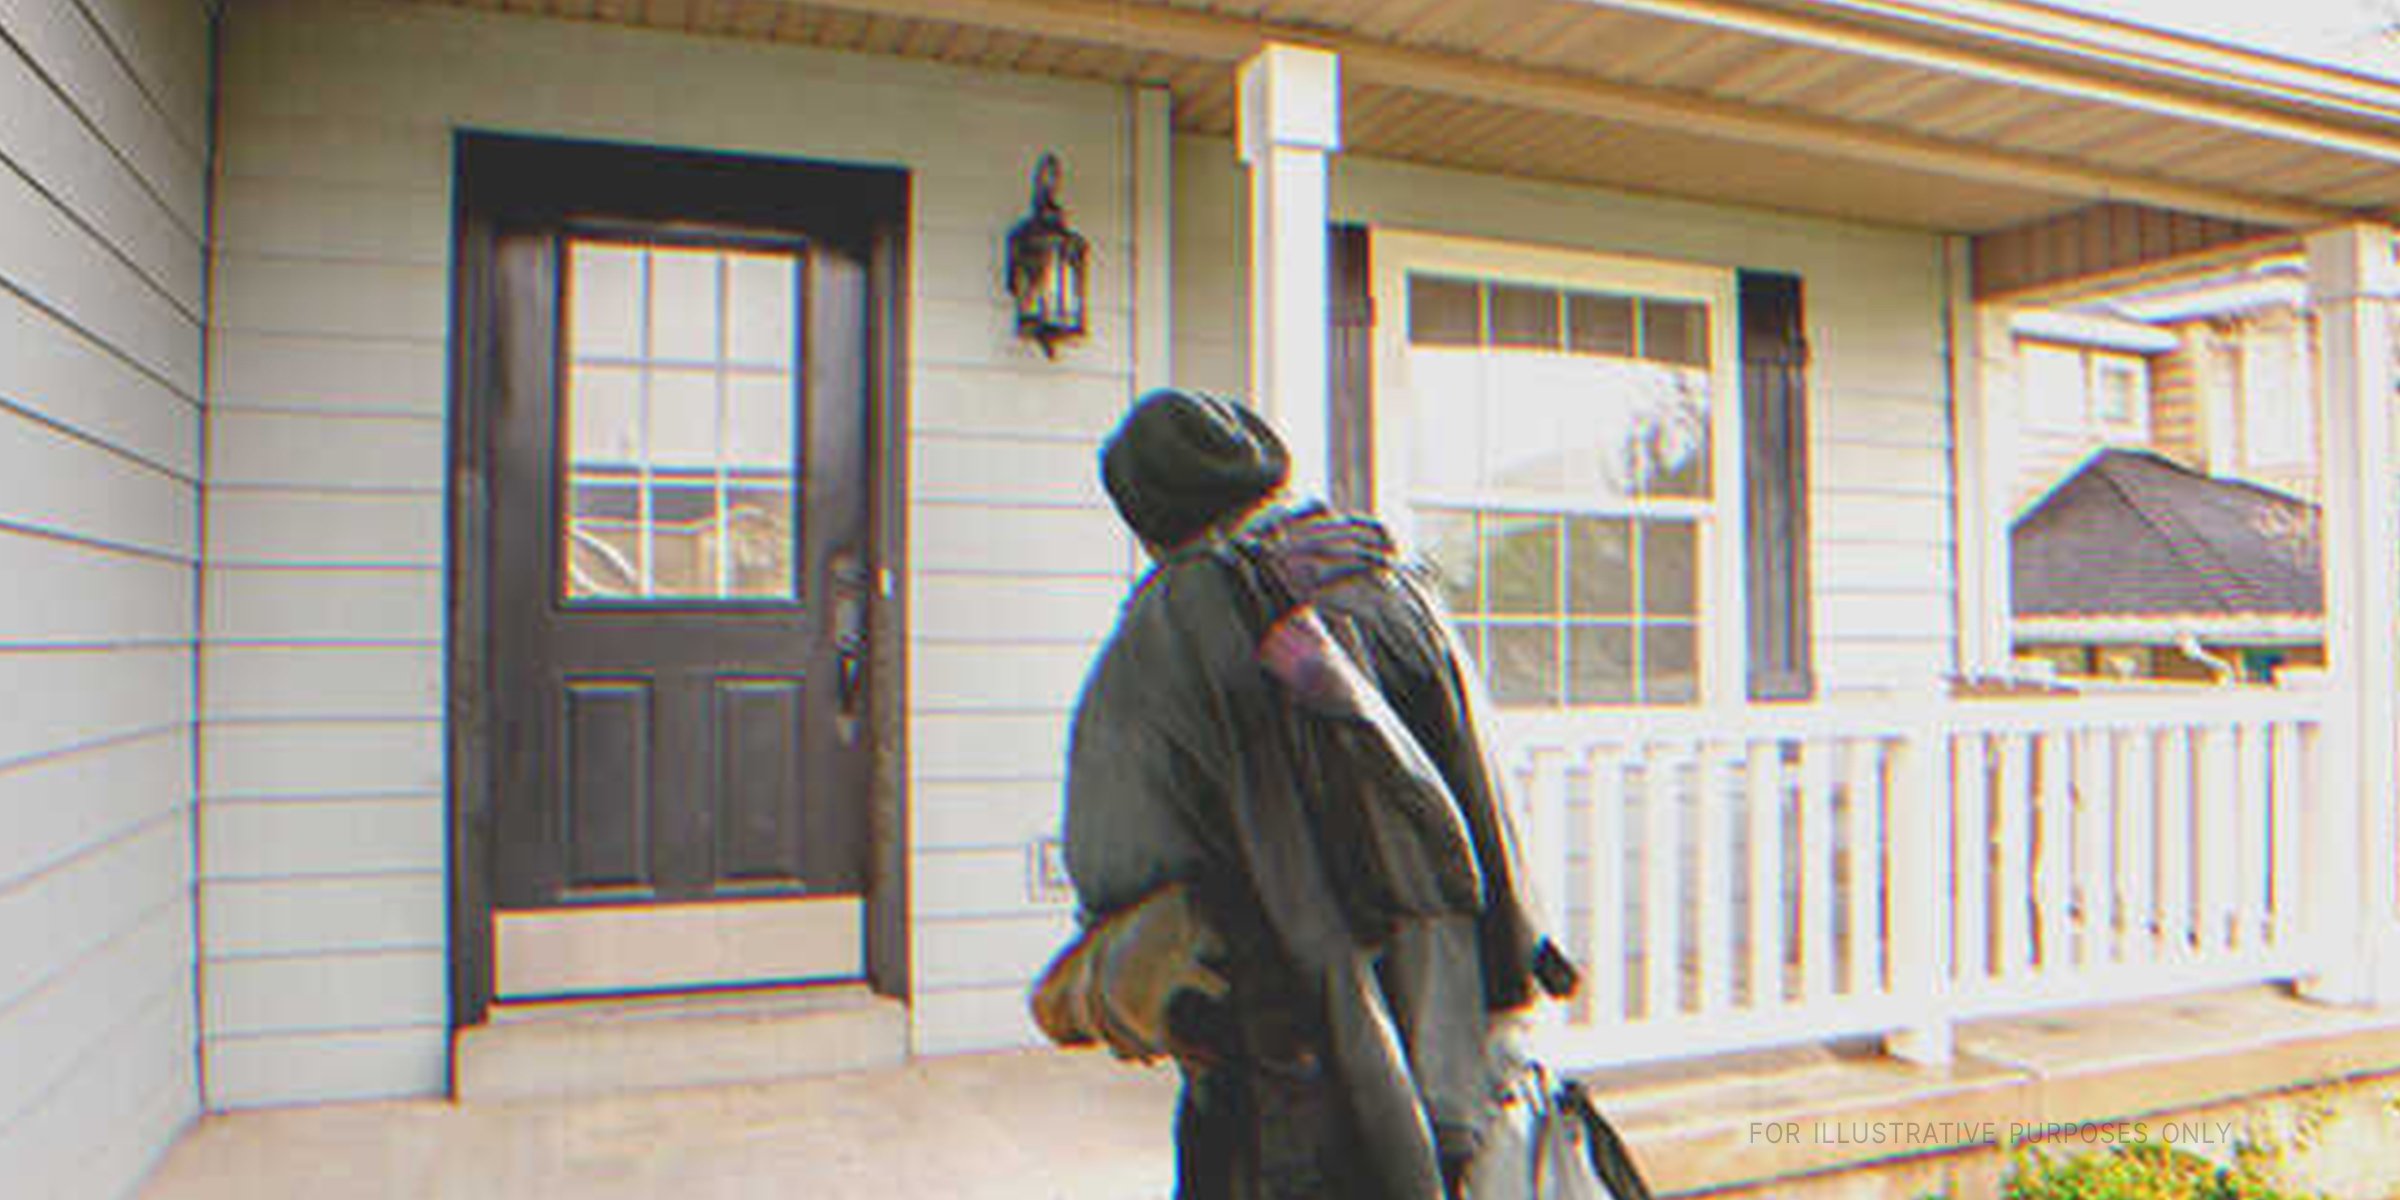 A homeless man on the porch of a house | Source: Shutterstock